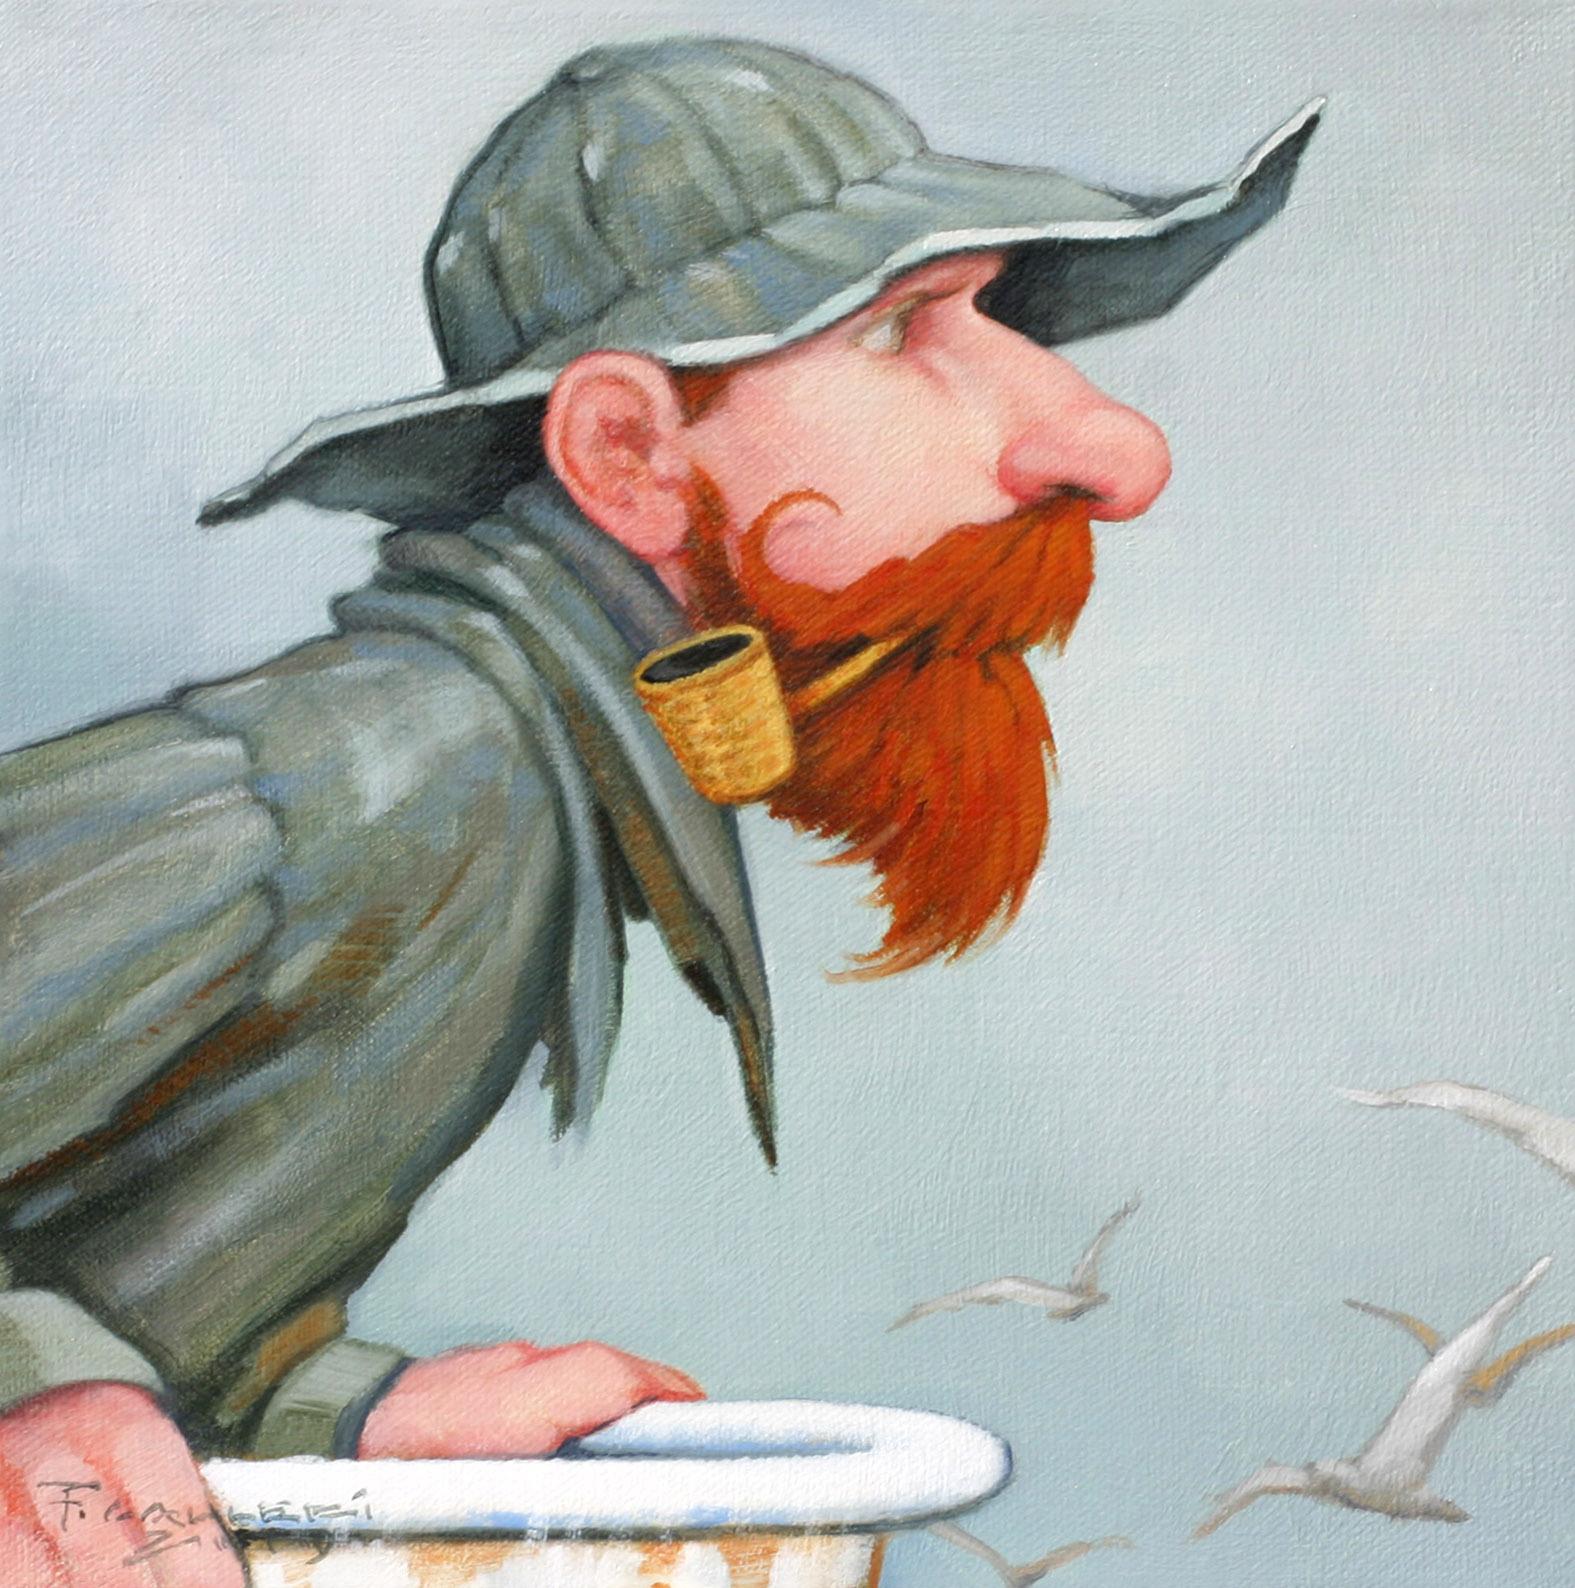 Fred Calleri Figurative Painting - "Mermaid Mirage" Oil painting of a fisherman with a red beard and pipe